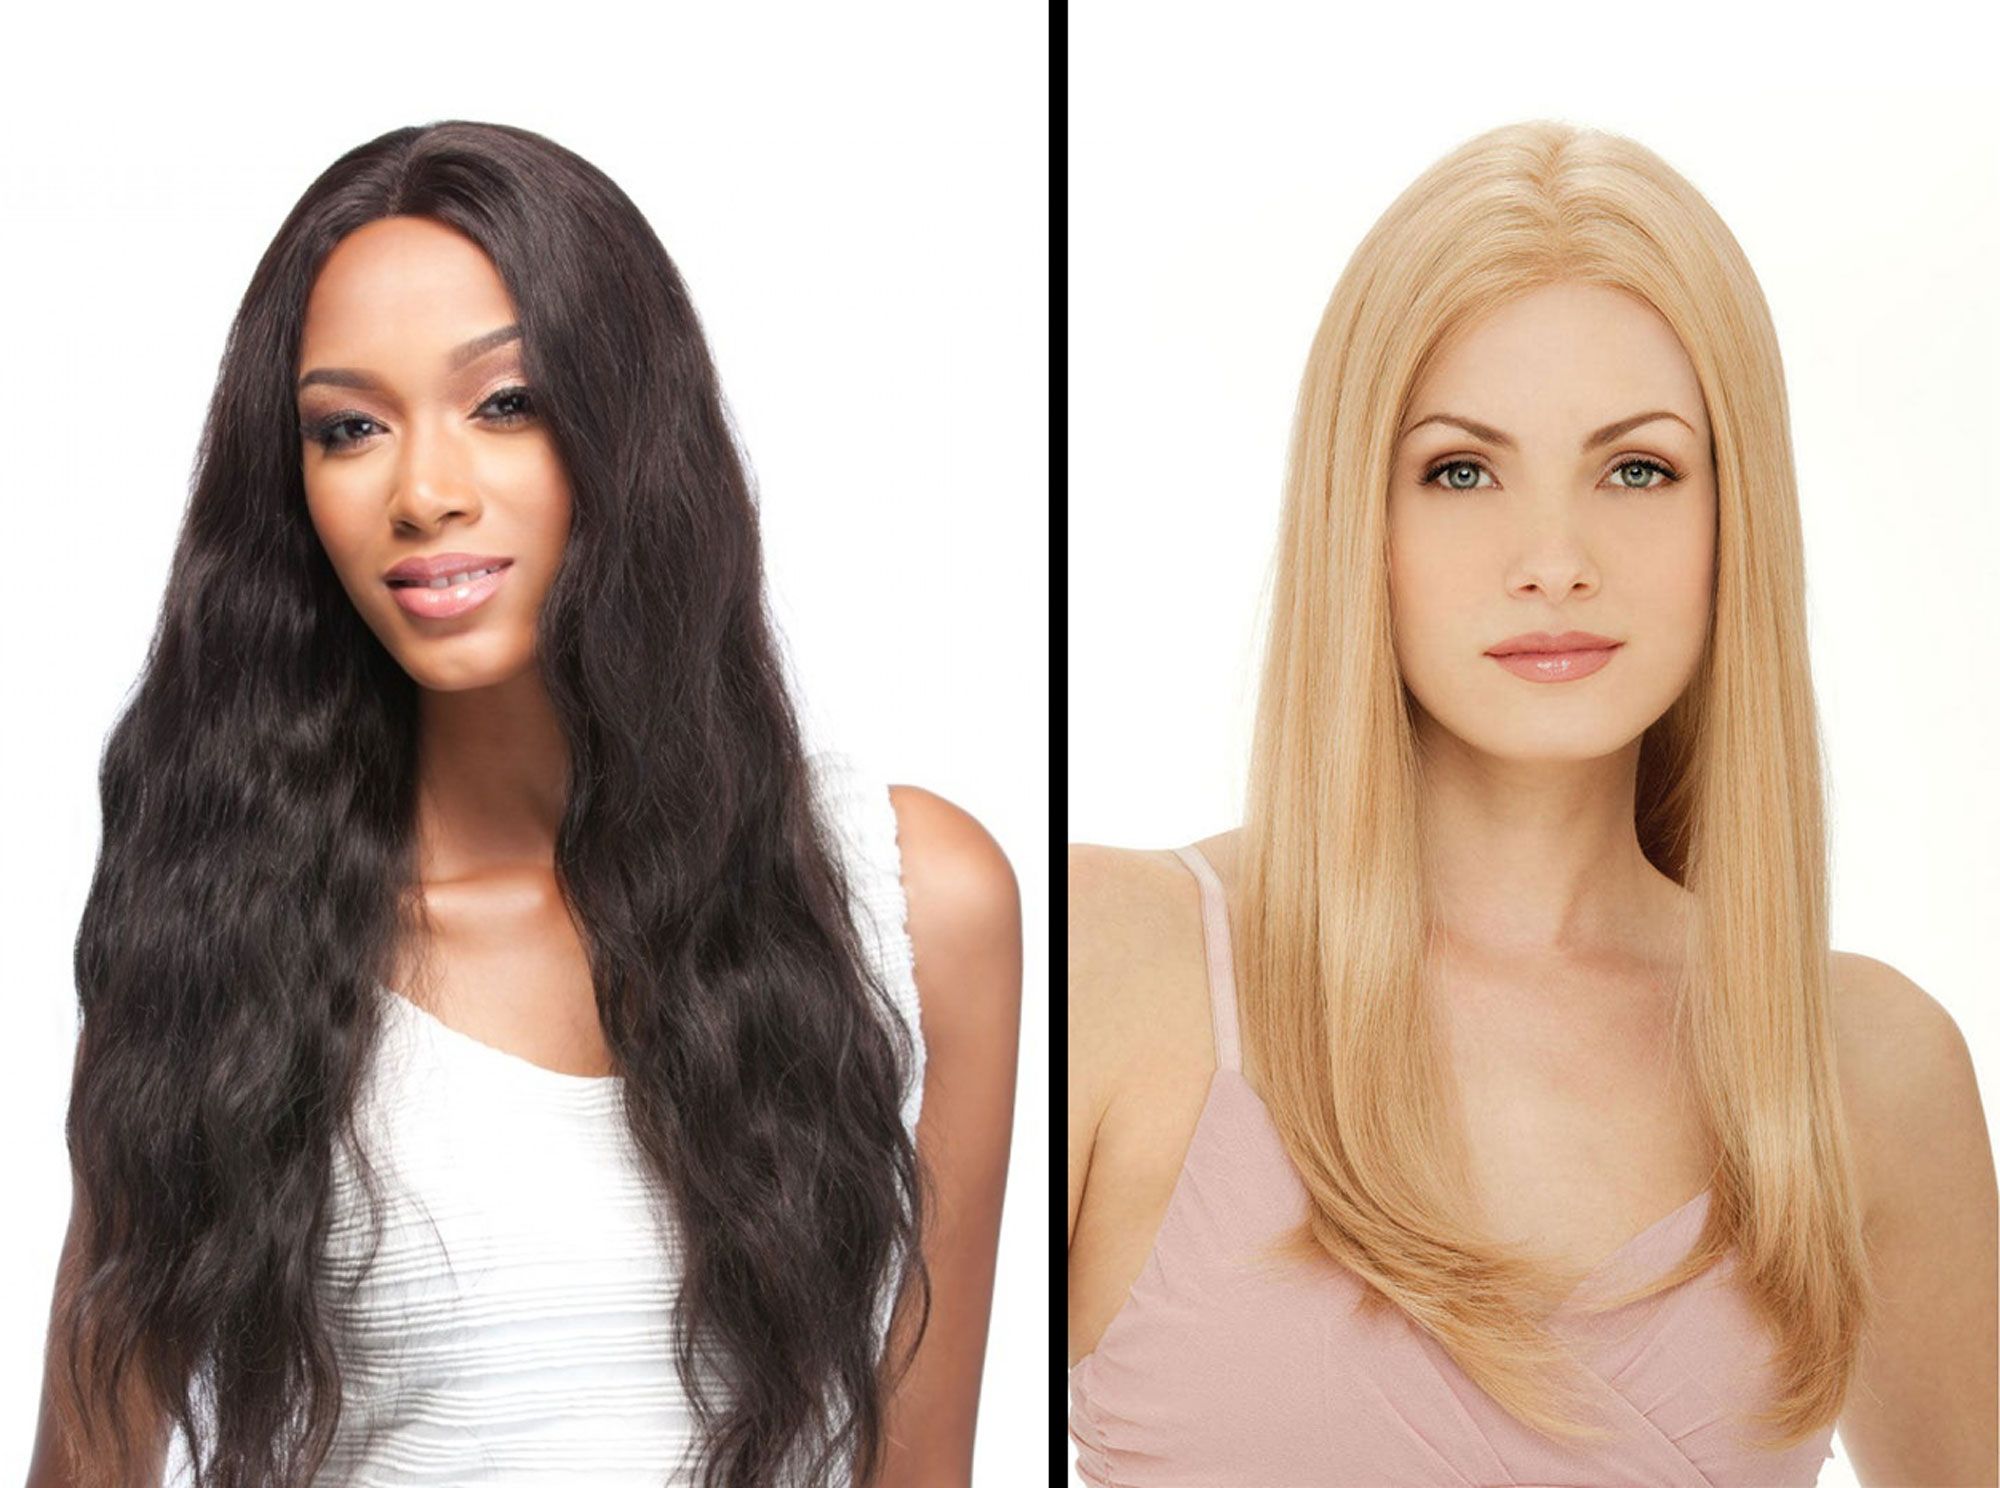 Are Human Hair Wigs and Extension Good For Us?